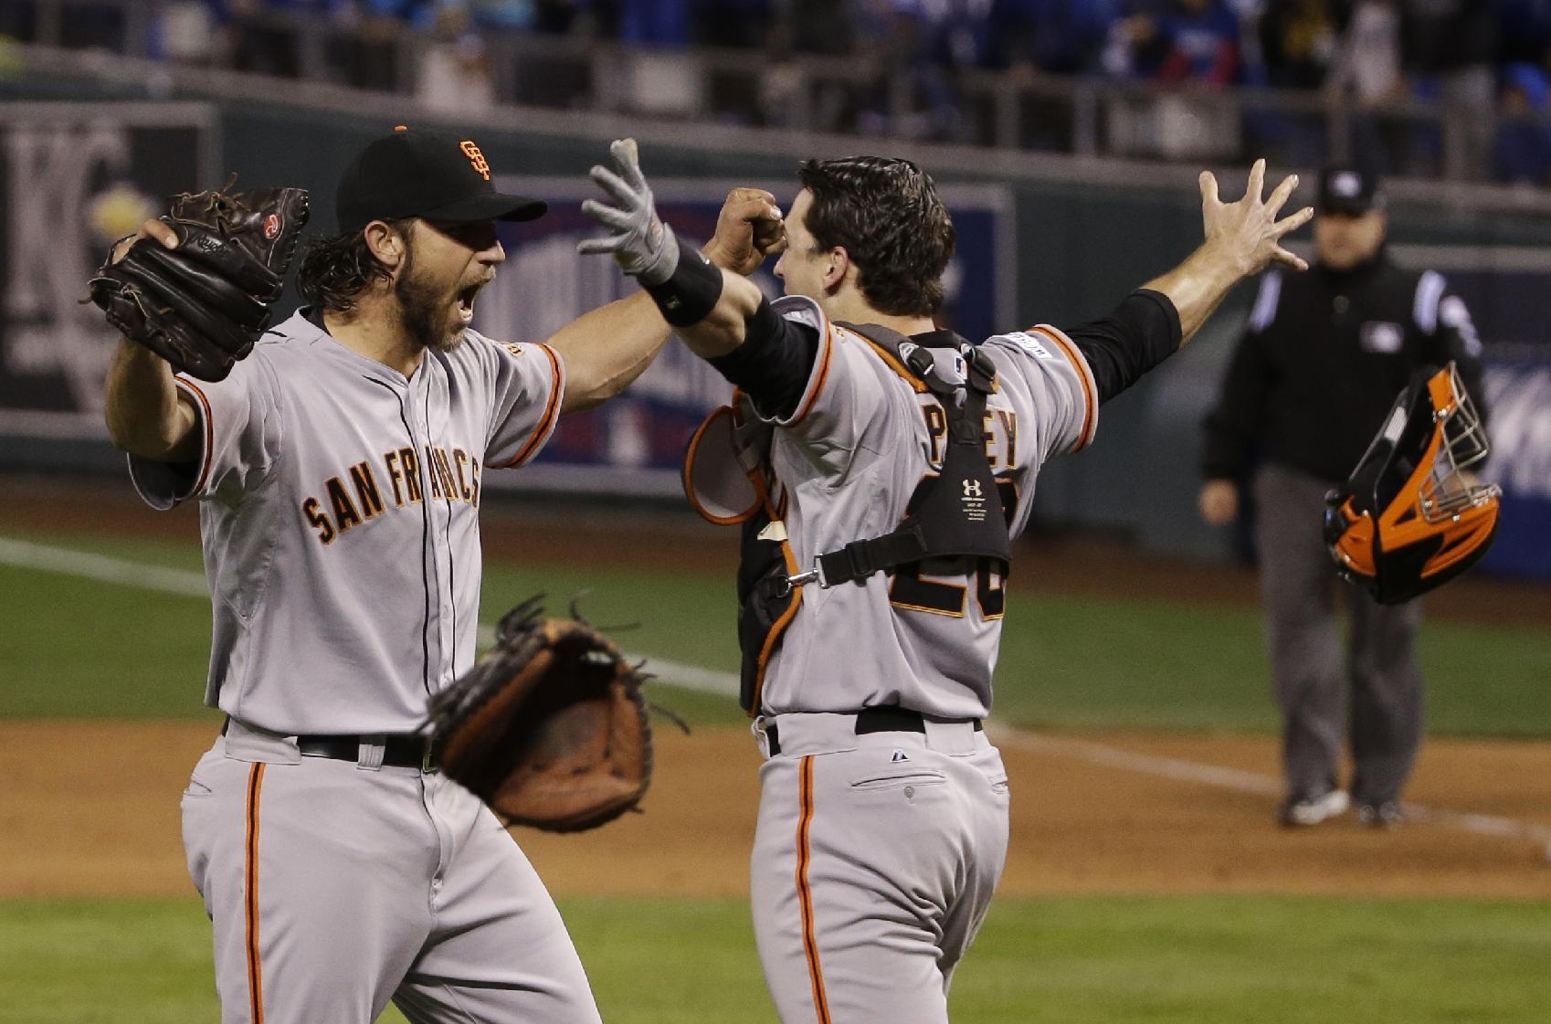 San Francisco Giants Pitcher Madison Bumgarner Left And Buster Posey